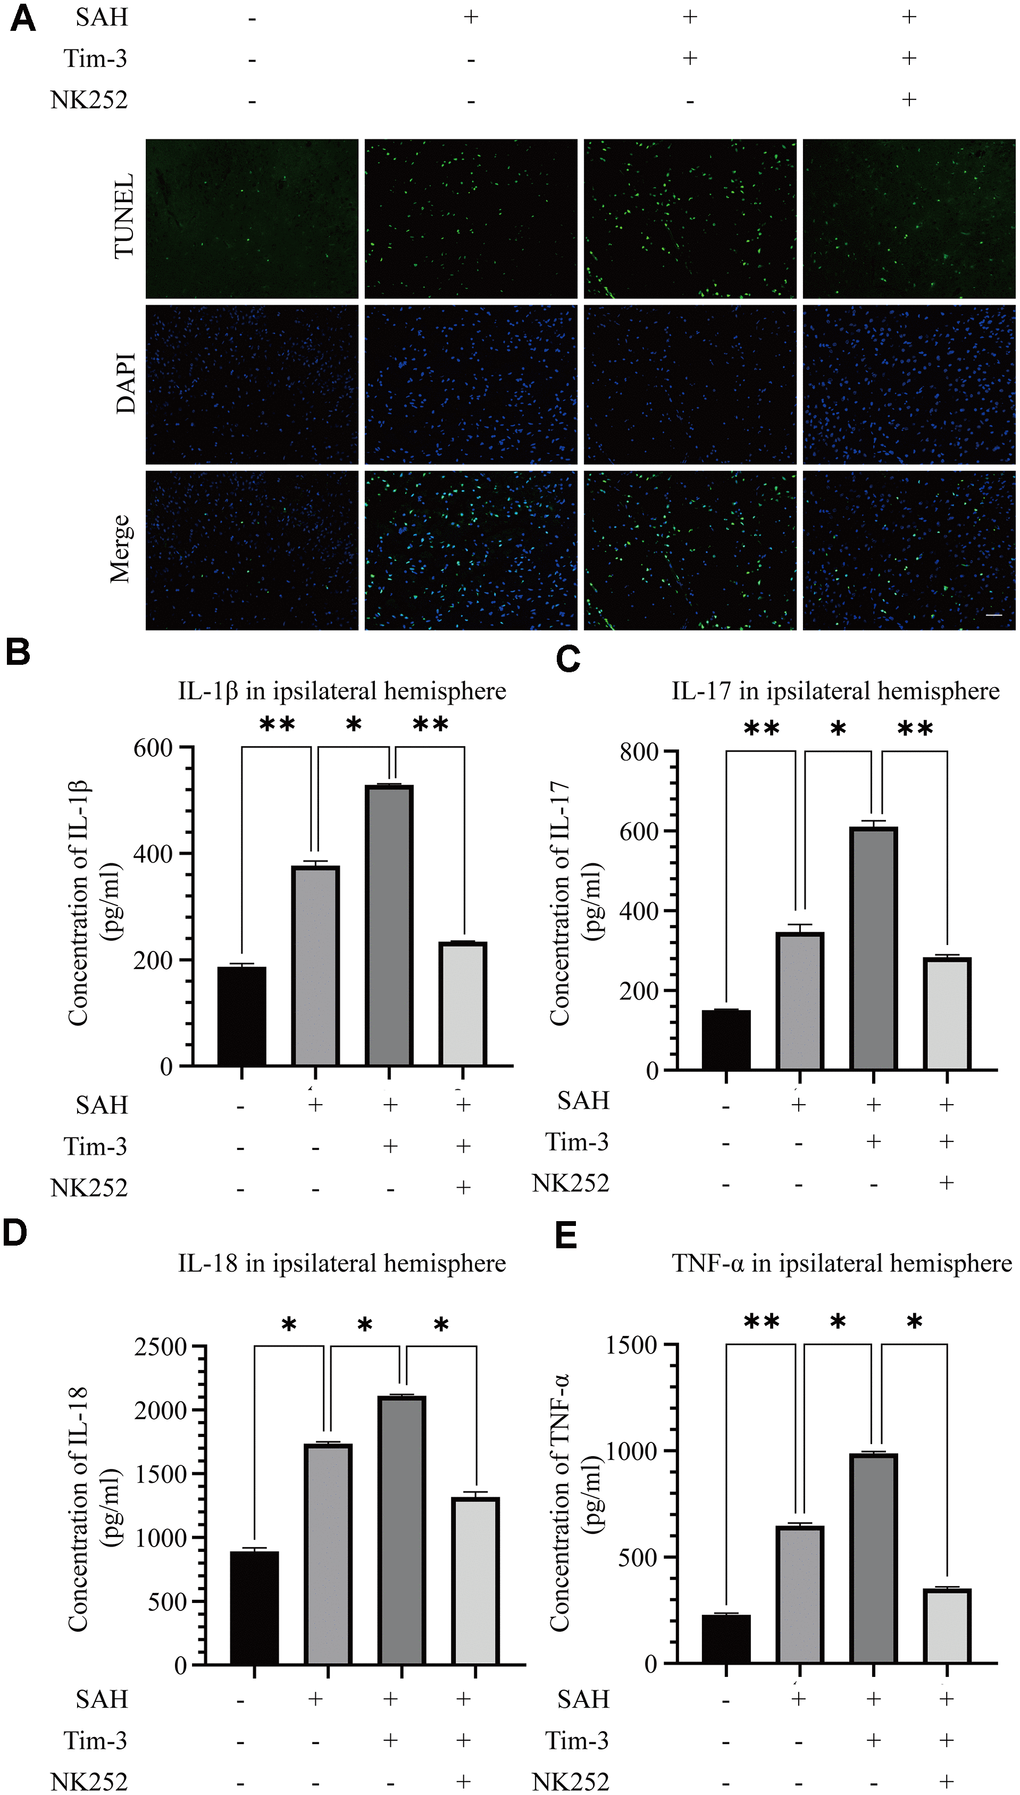 NK252 treatment abolished neurocyte apoptosis and the inflammatory effects associated with Tim-3. TUNEL staining showing that NK252 treatment significantly decreased TUNEL-positive neurocyte (A) and the expression of the pro-inflammatory cytokines, IL-1β (B), IL-17 (C), and IL-18 (D) TNF-α (E) (n = 6 in each group). Data are expressed as the mean ± SEM.*p 